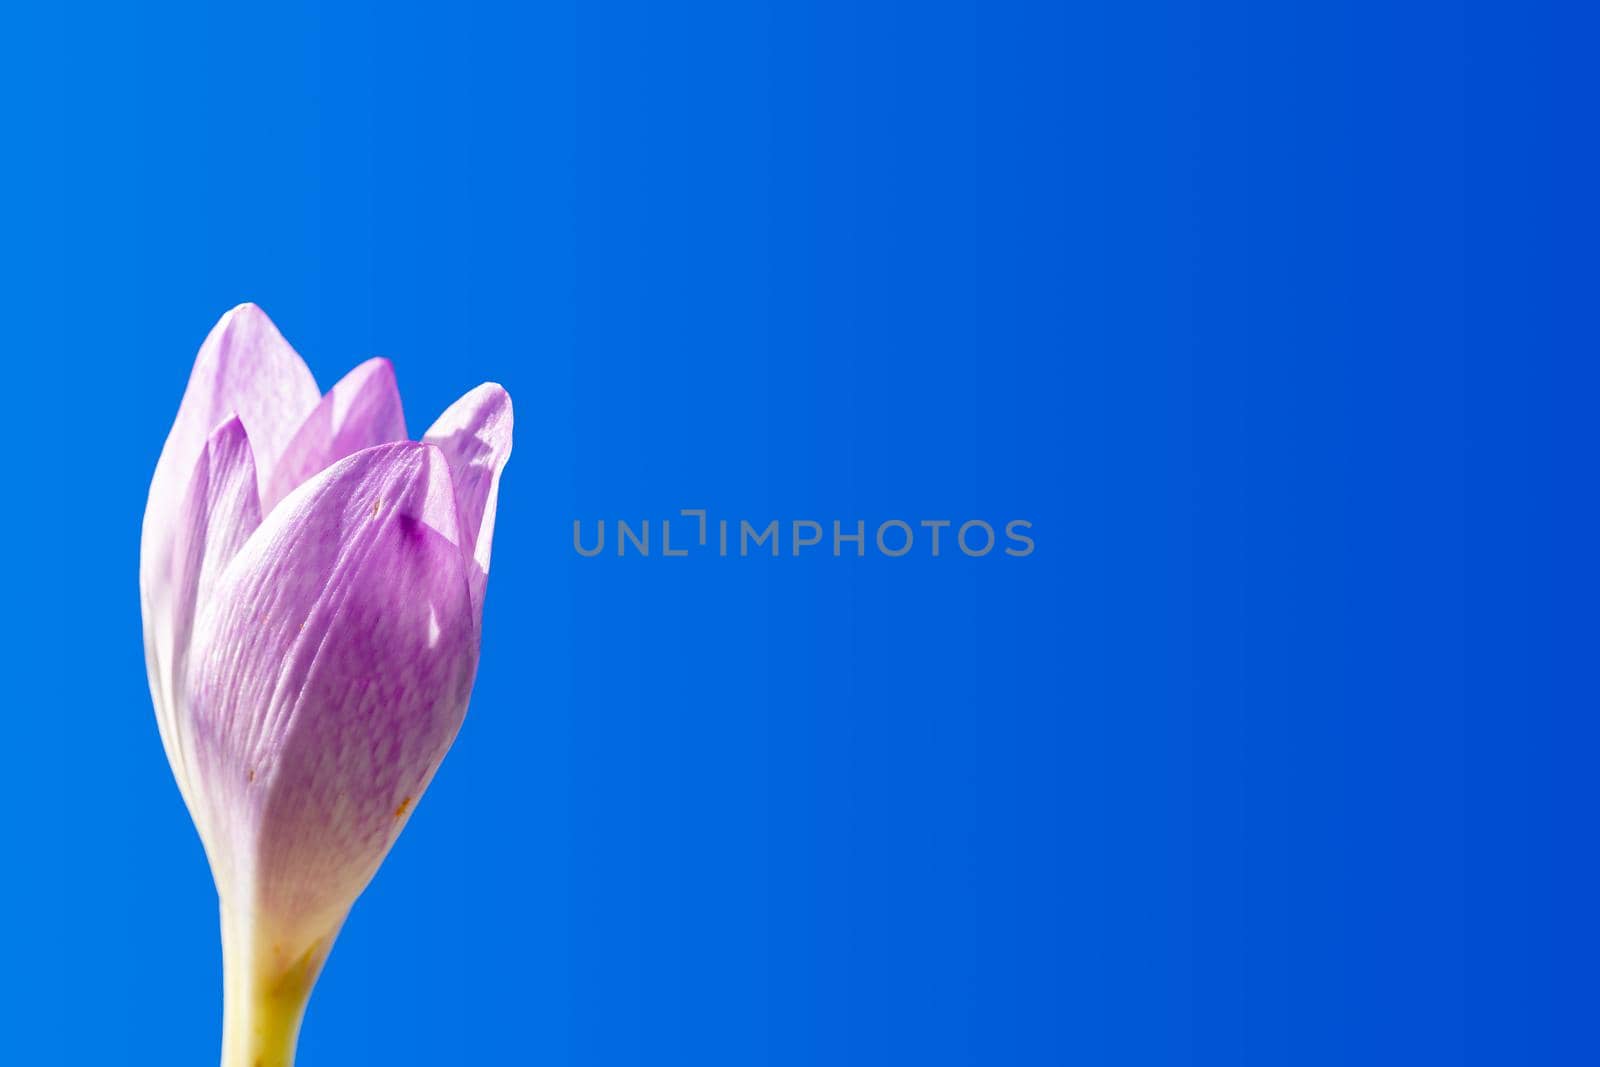 A beautiful crocus flower bud is blooming against a blue sky background. Copy space by Serhii_Voroshchuk